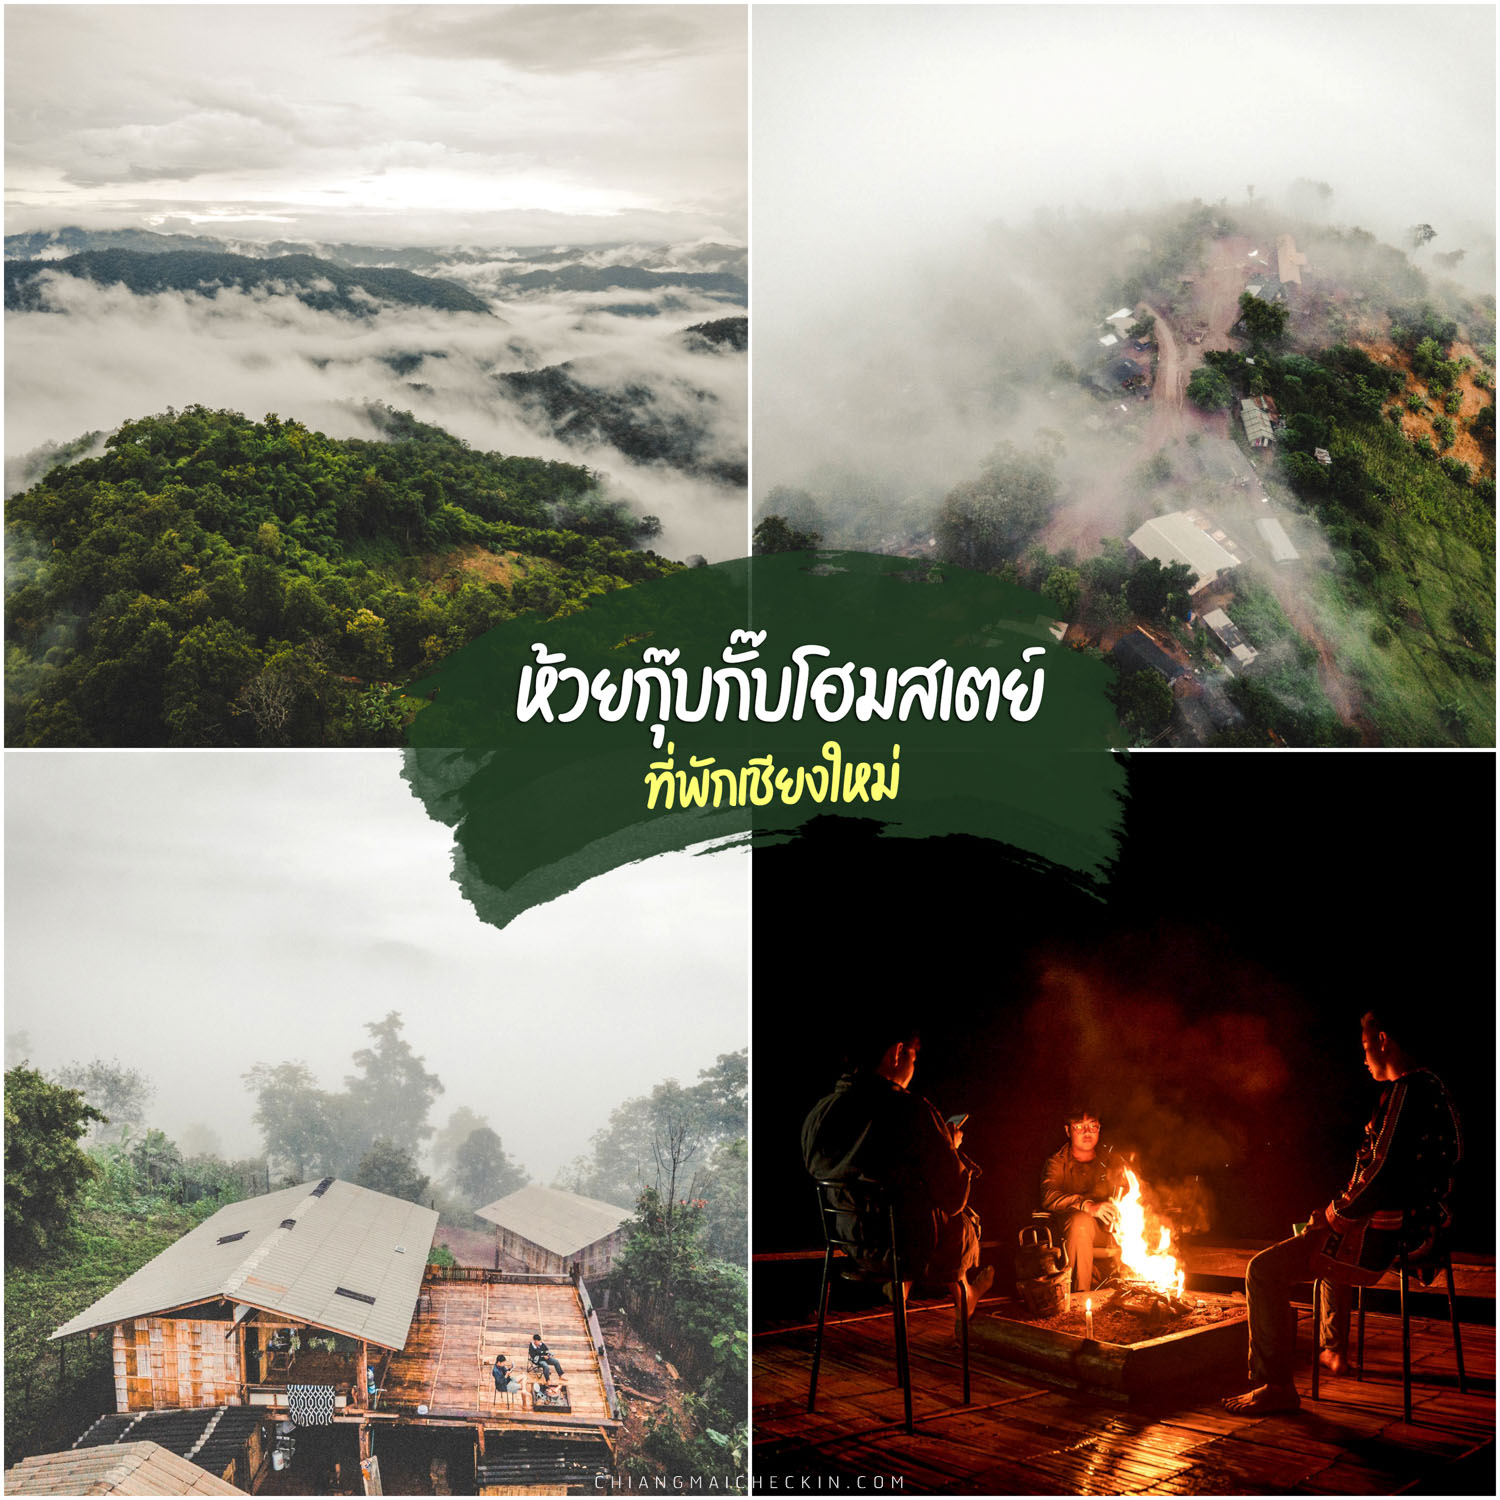 Huai Kup Kab Homestay, Mae Taeng, accommodation in Chiang Mai, sleep and look at the stars, a homestay surrounded by a sea of ??mist and mountains, extremely beautiful.